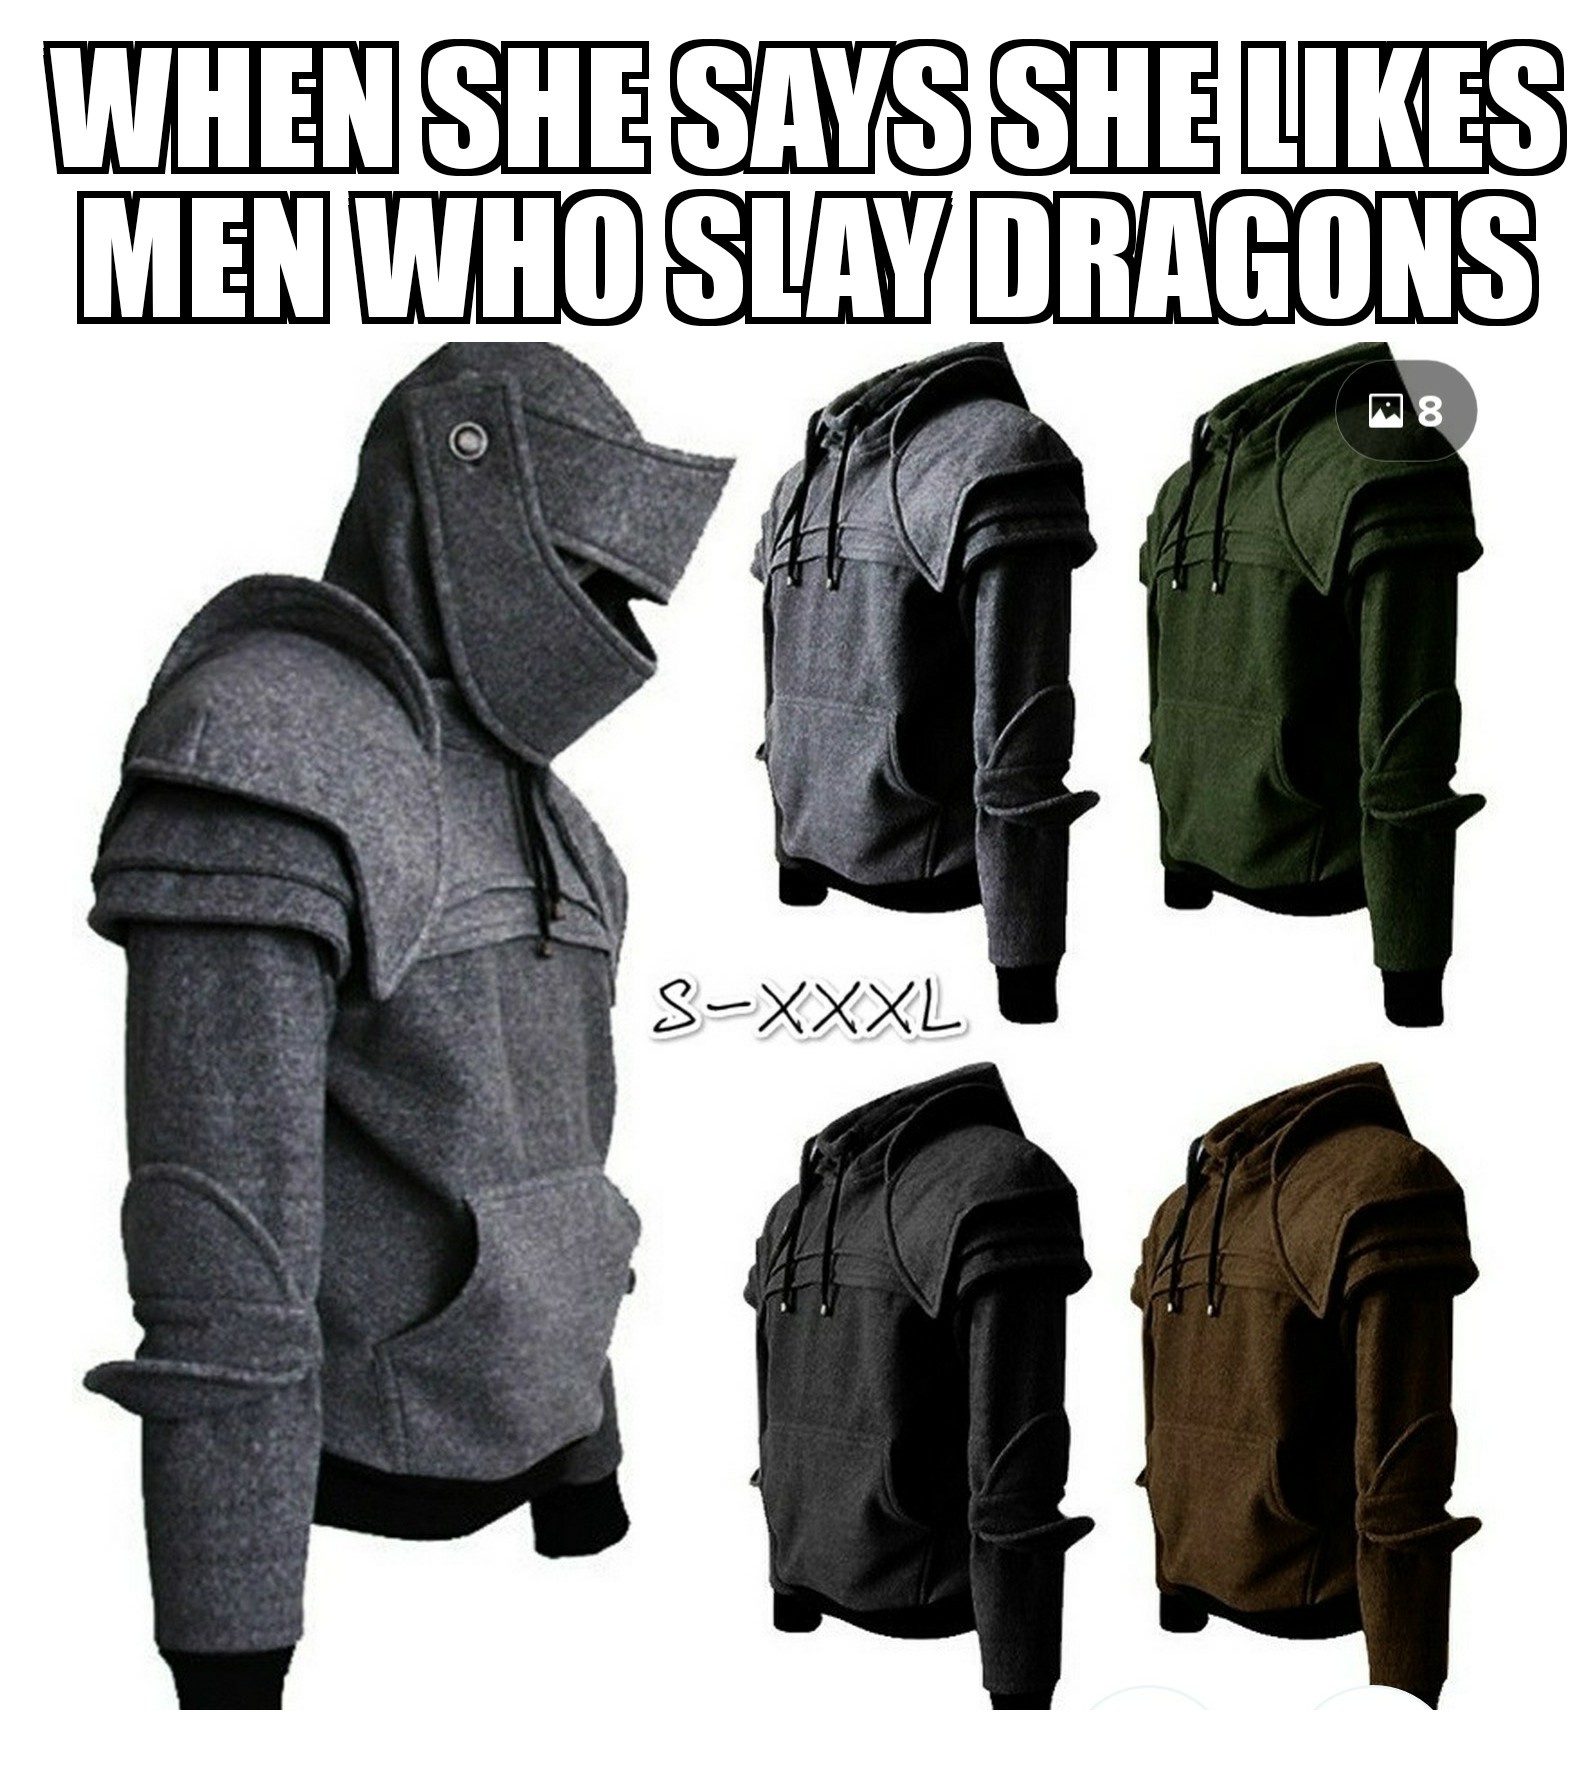 knight hoodie - When She Says She Men Who Slay Dragons 08 SXxxl